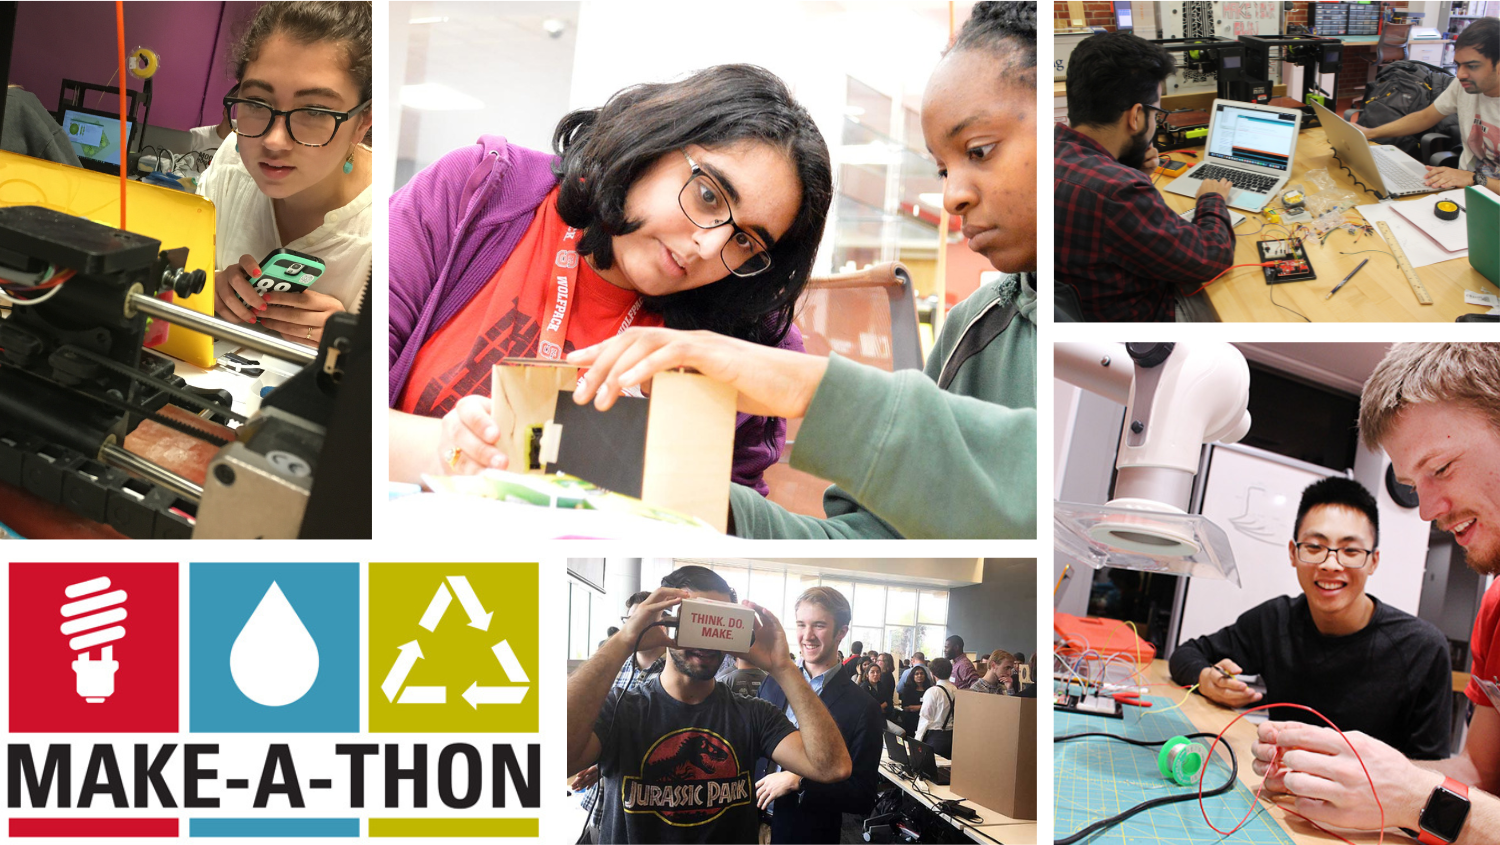 A collage of photos related to Make-A-Thon